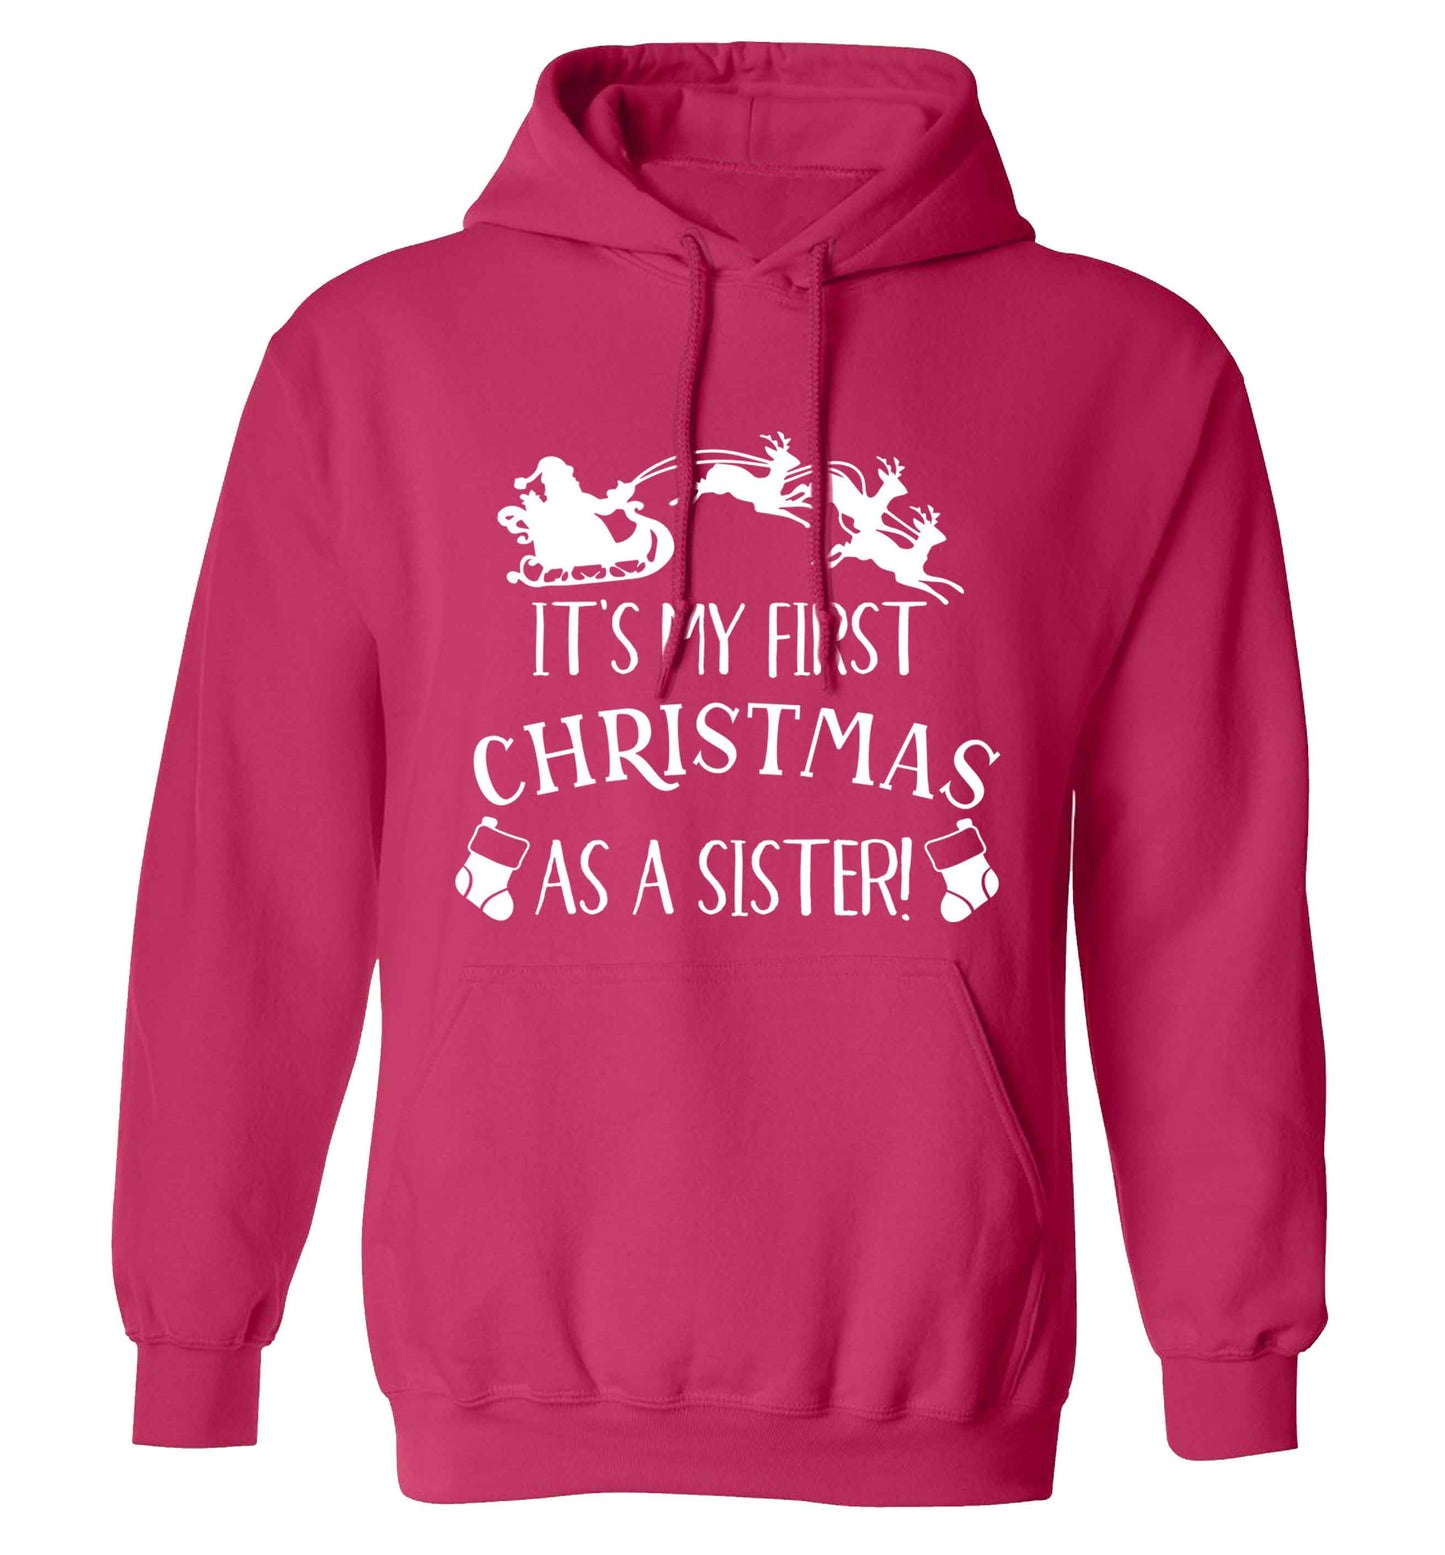 It's my first Christmas as a sister! adults unisex pink hoodie 2XL